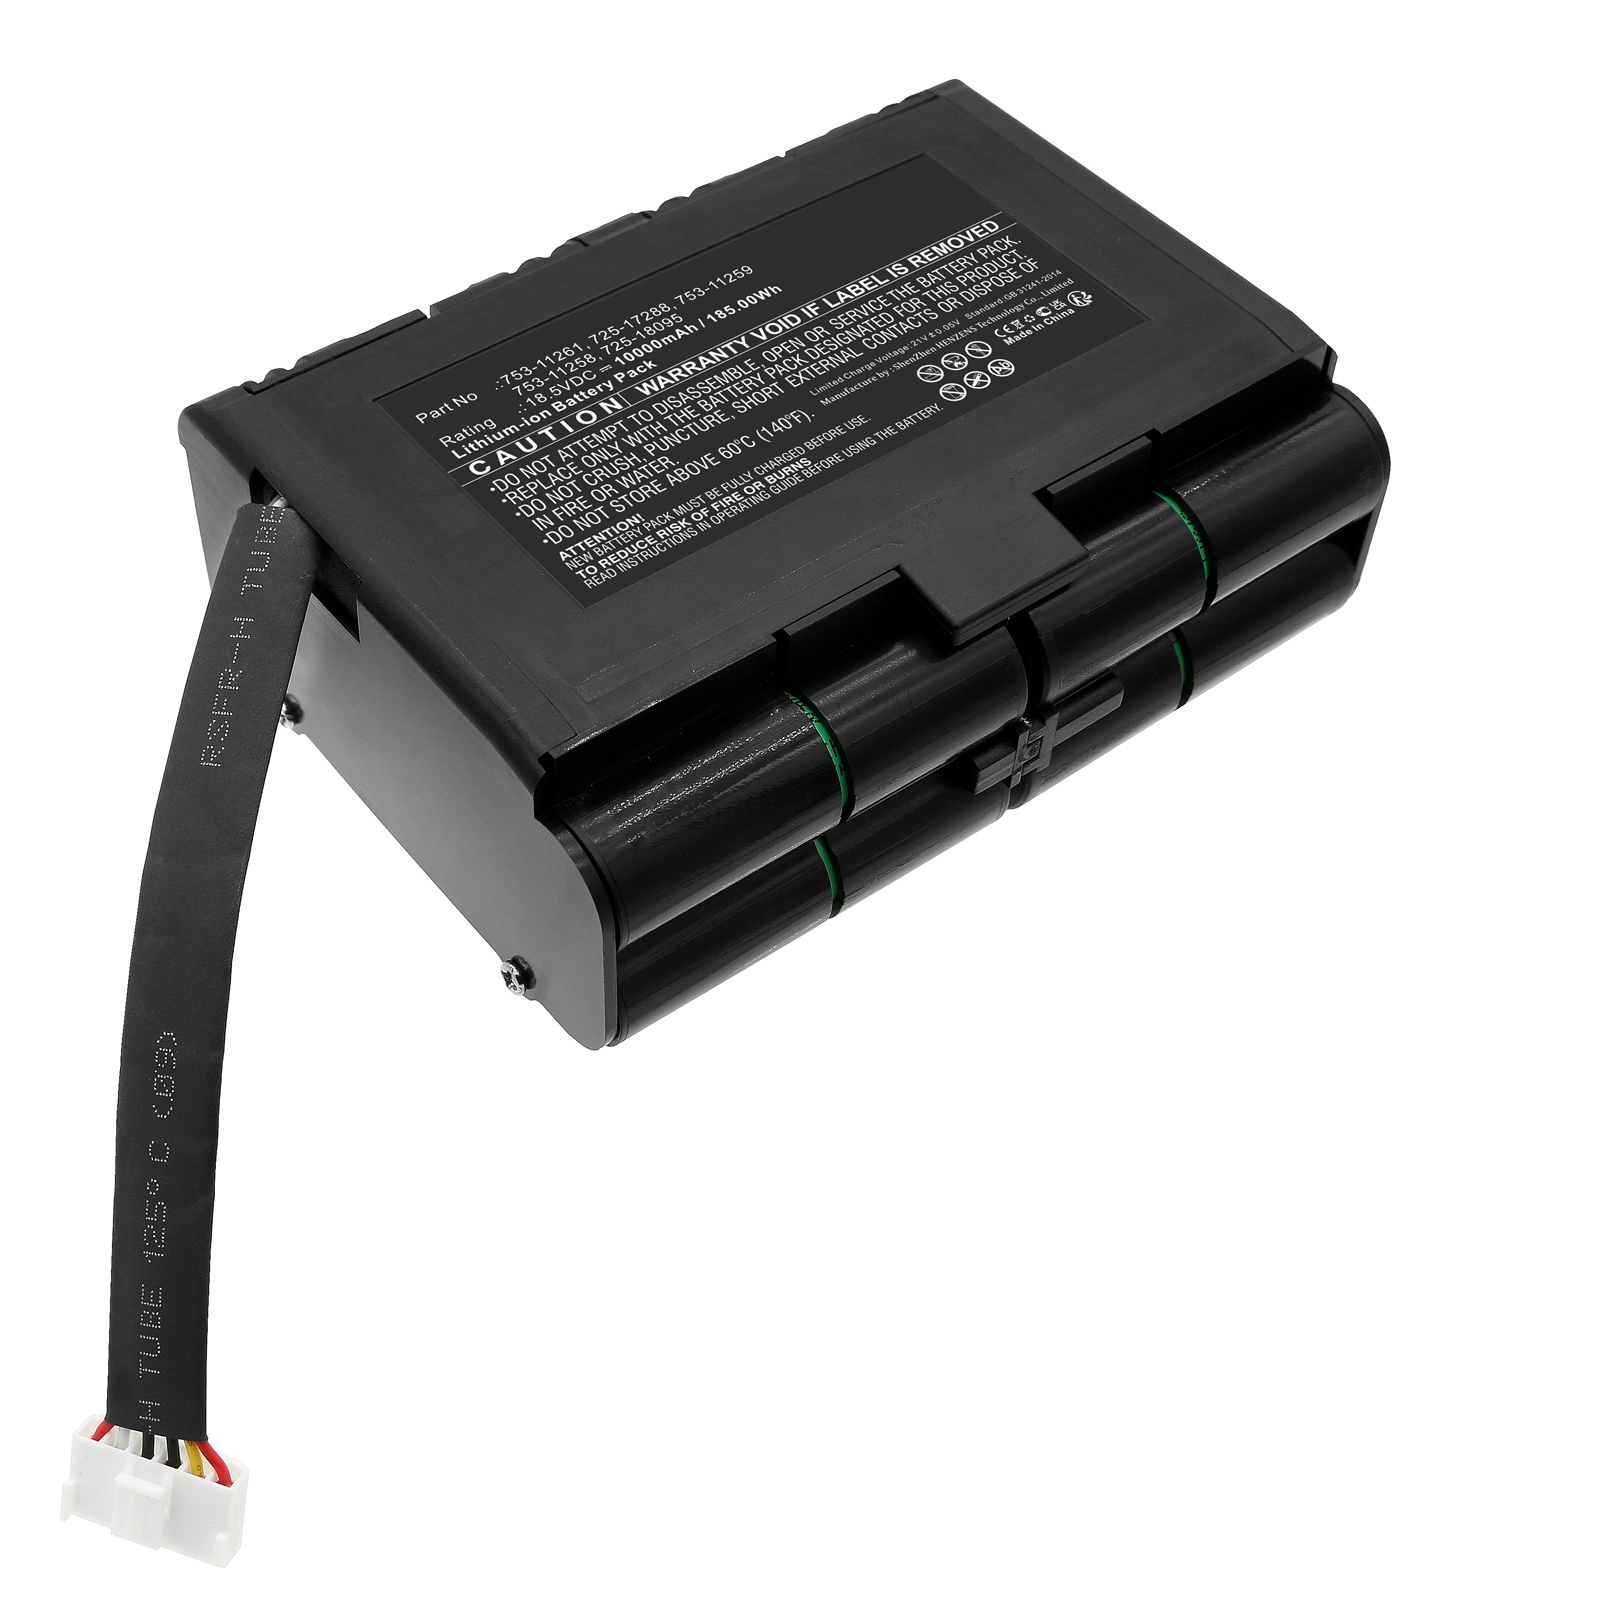 Synergy Digital Lawn Mower Battery, Compatible with Robomow 725-17288 Lawn Mower Battery (Li-ion, 18.5V, 10000mAh)